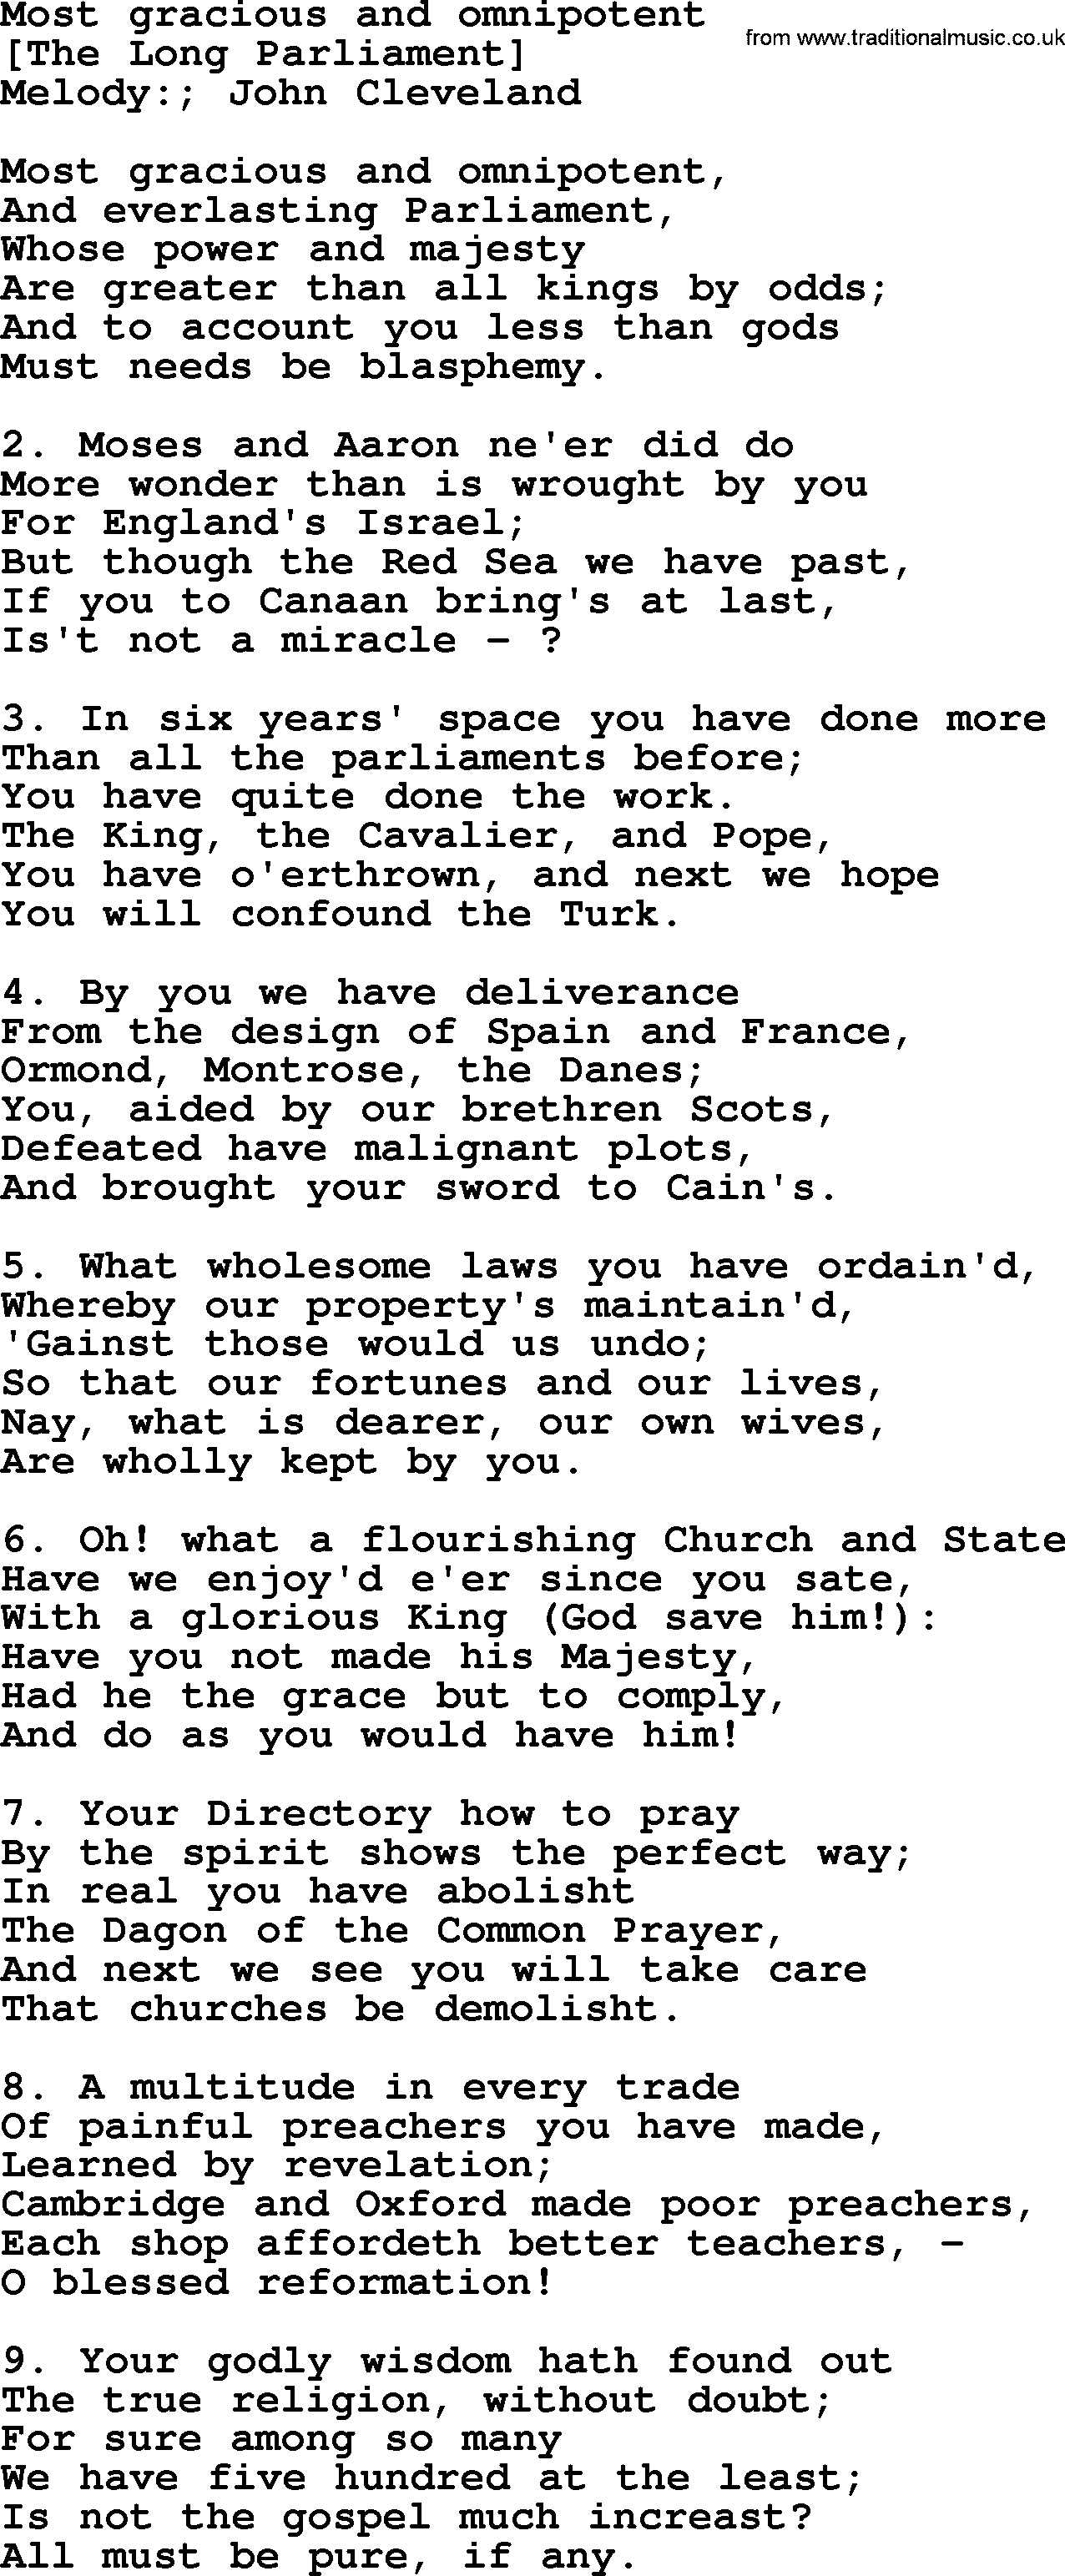 Old English Song: Most Gracious And Omnipotent lyrics